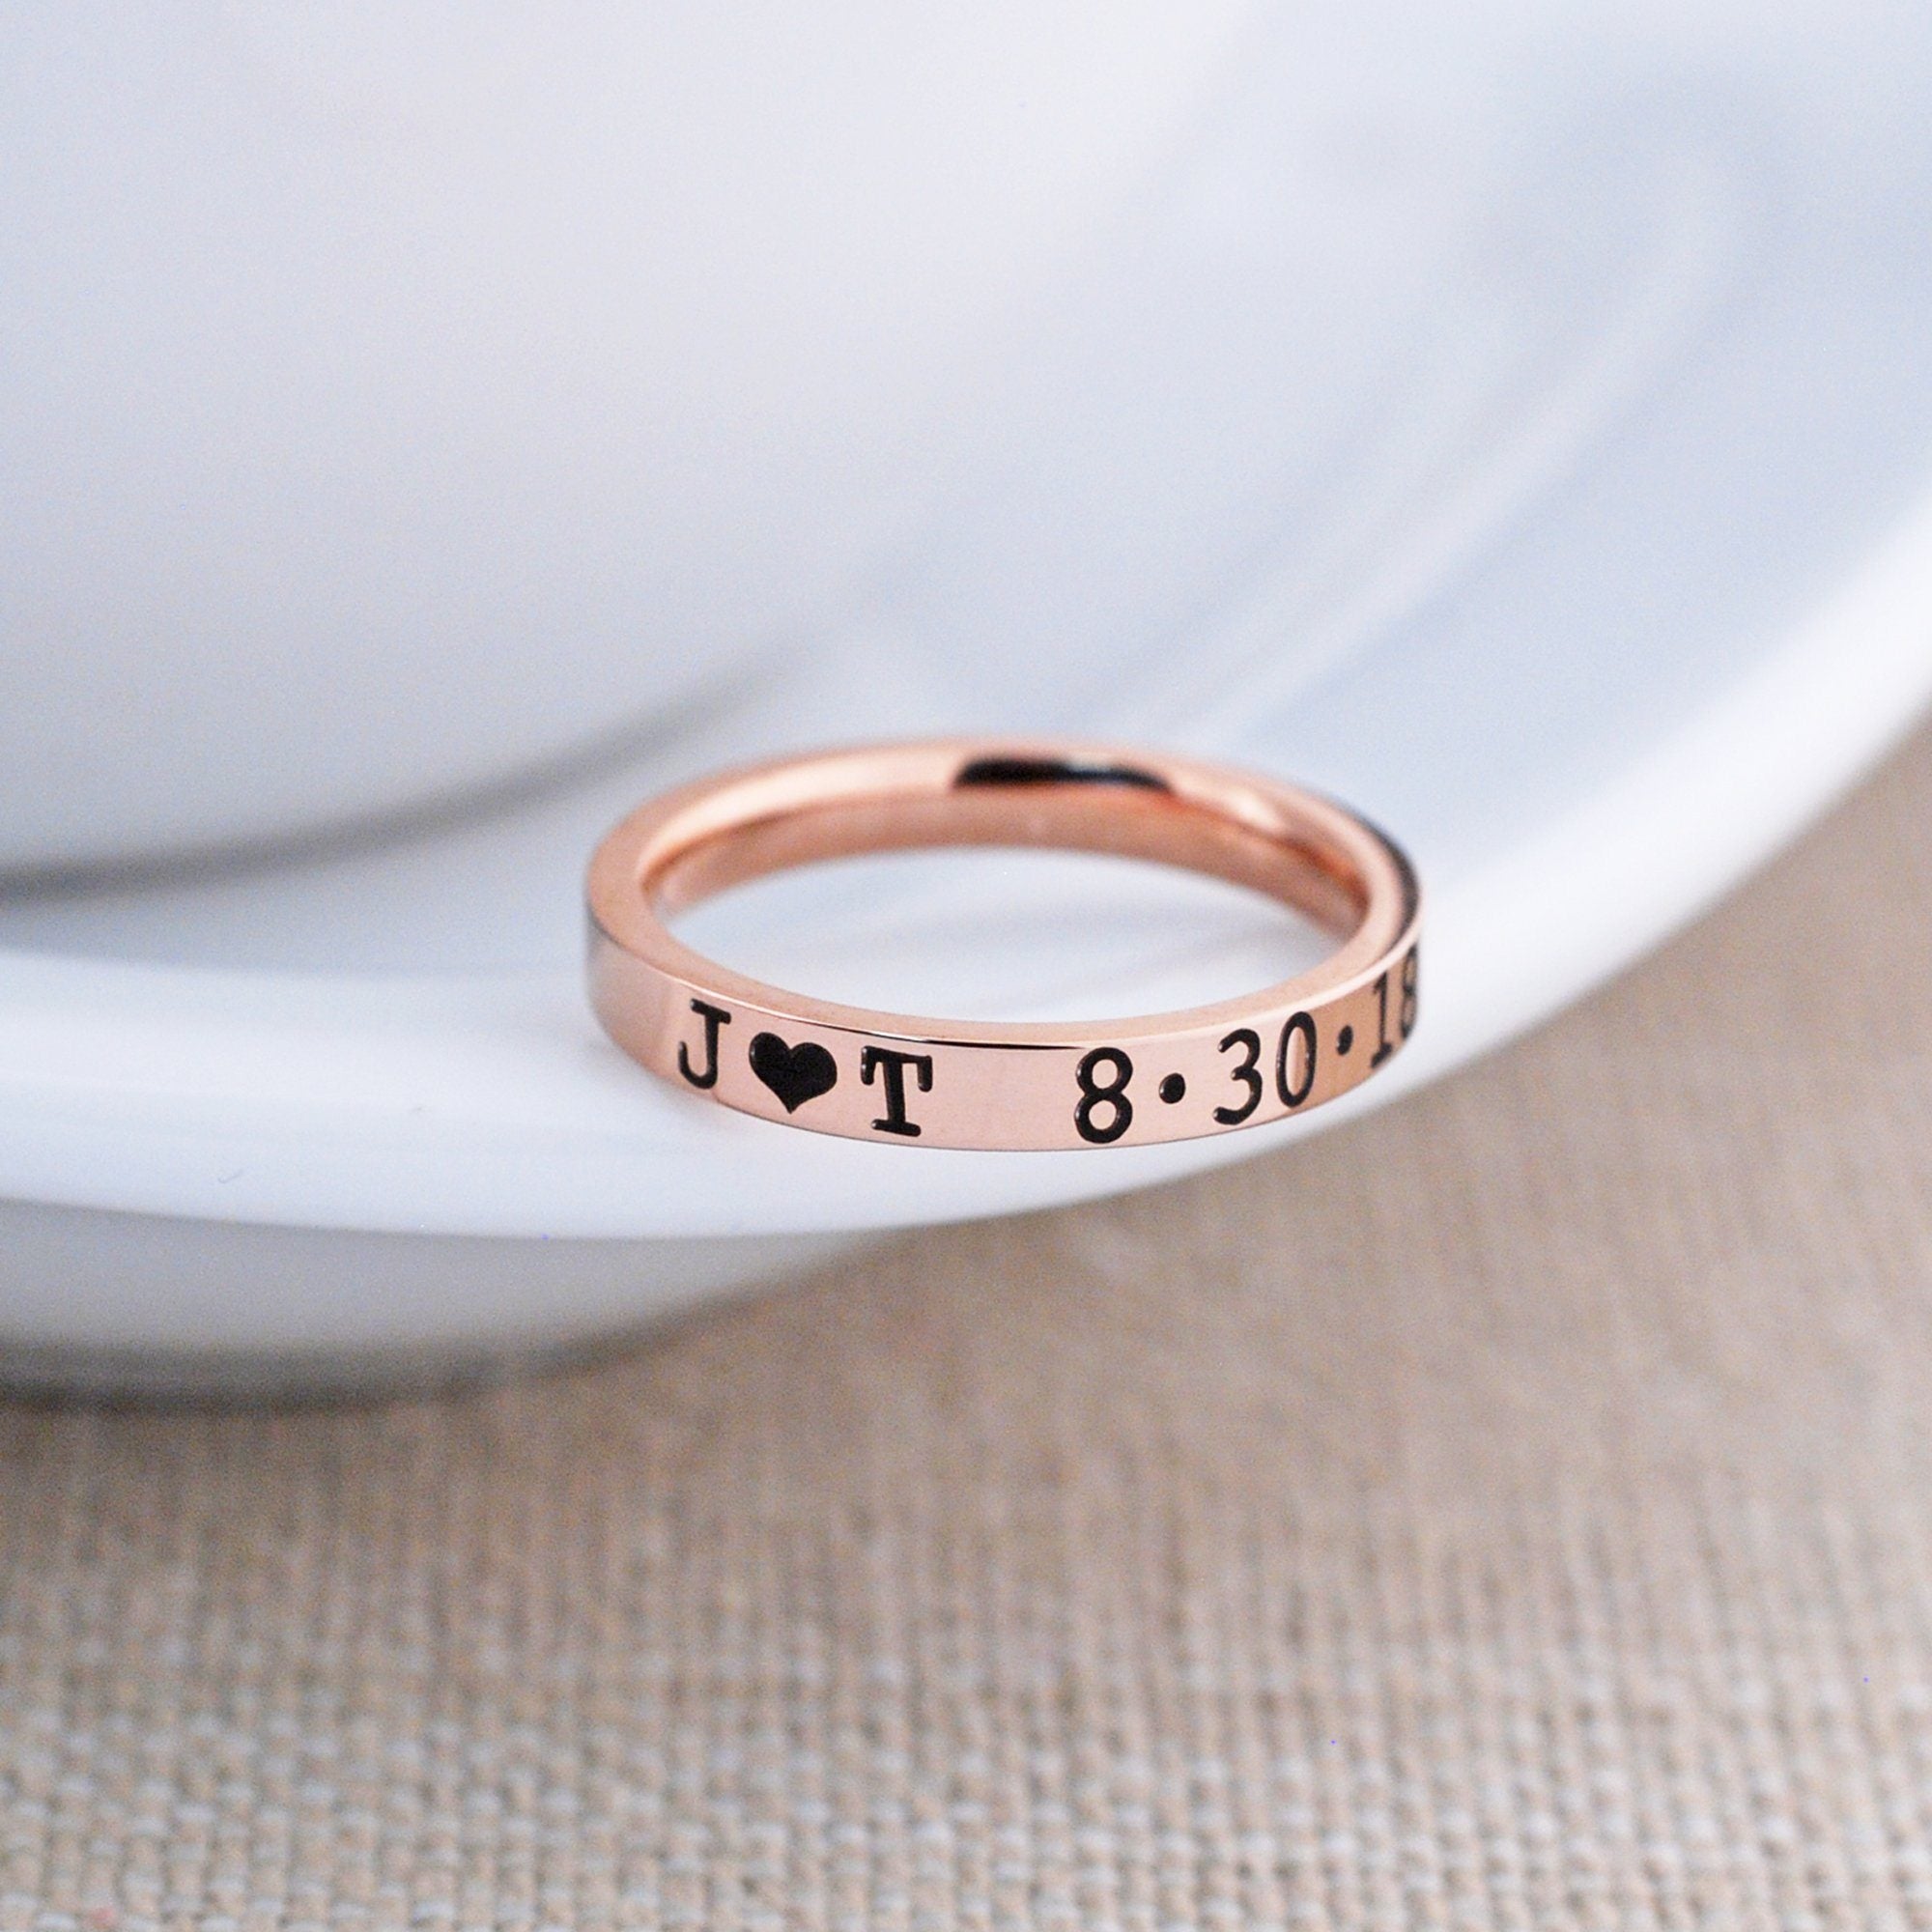 Anniversary Ring - 3mm - with Date and Initials - Love, Georgie